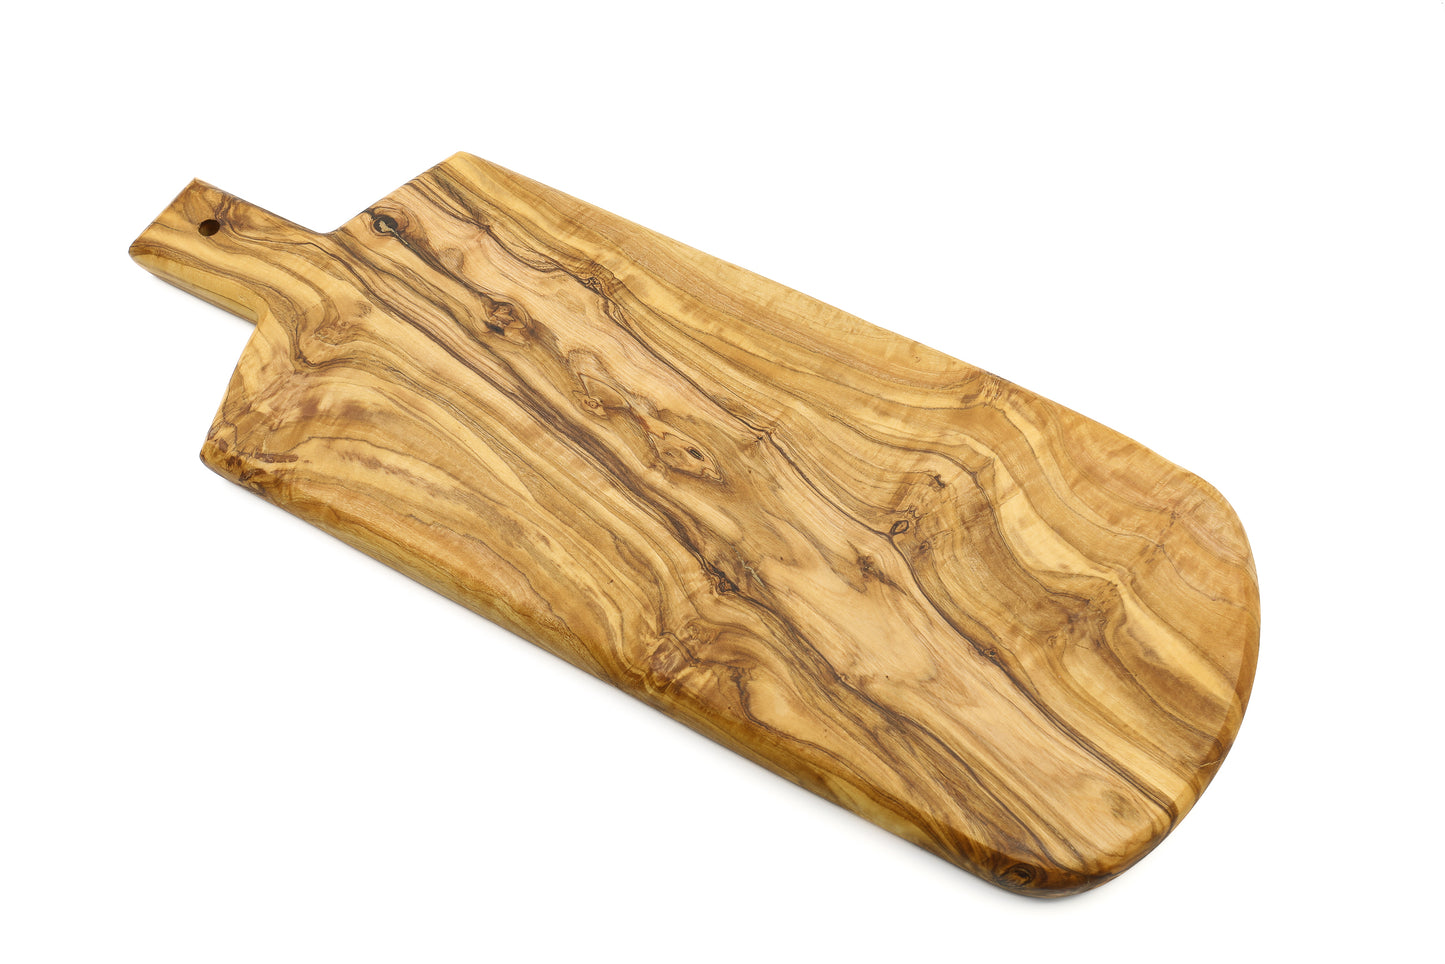 A serving board crafted from olive wood in a shield shape, complete with a handle